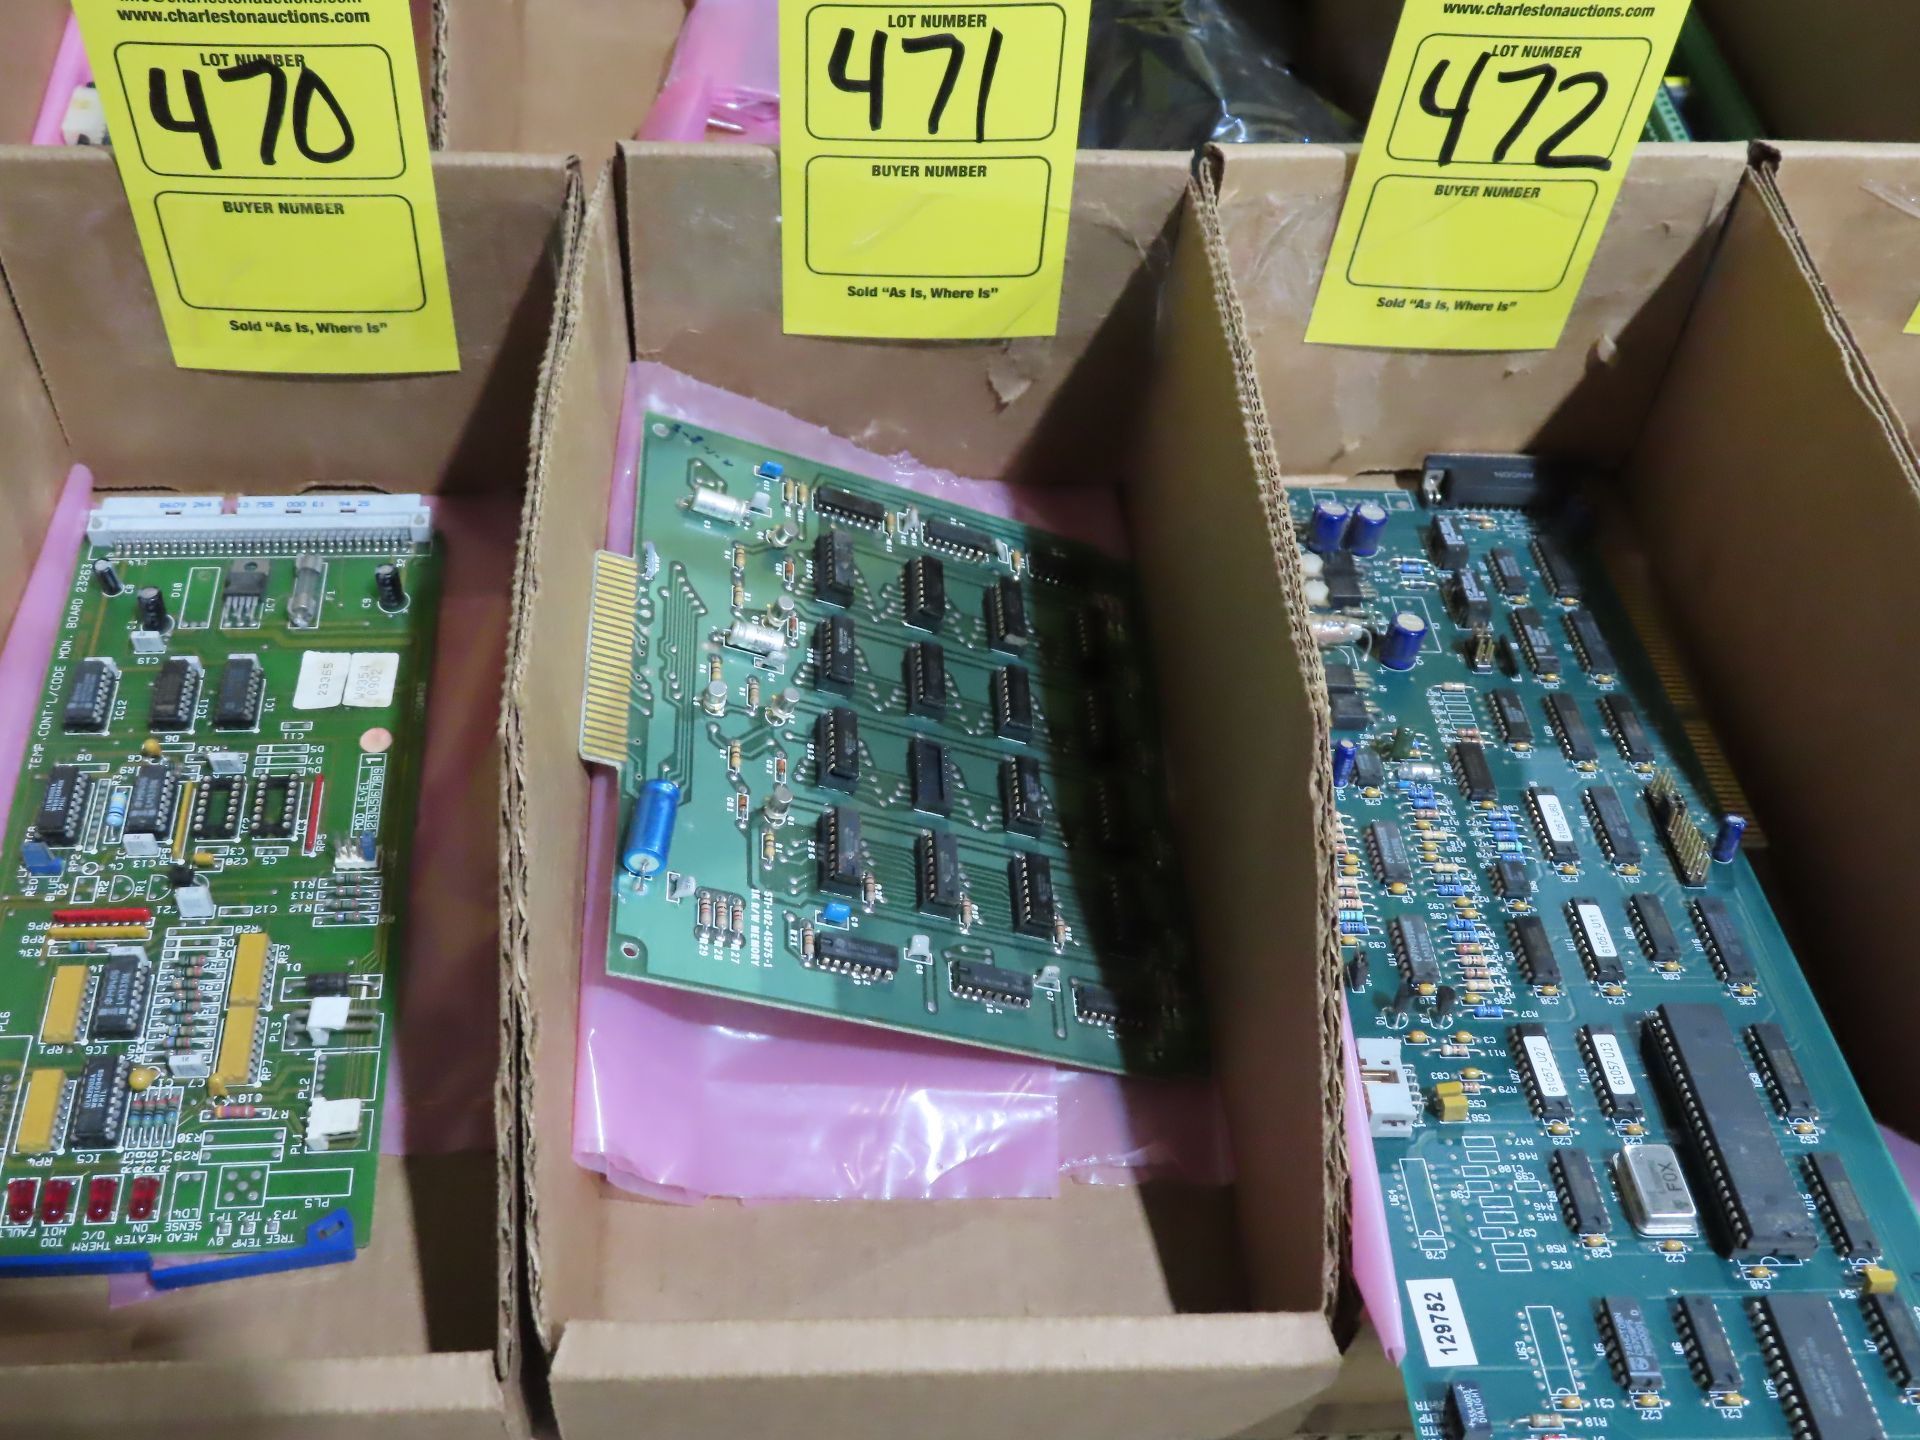 Texas Instruments 5T1-102-45675-1 memory board, as always, with Brolyn LLC auctions, all lots can be